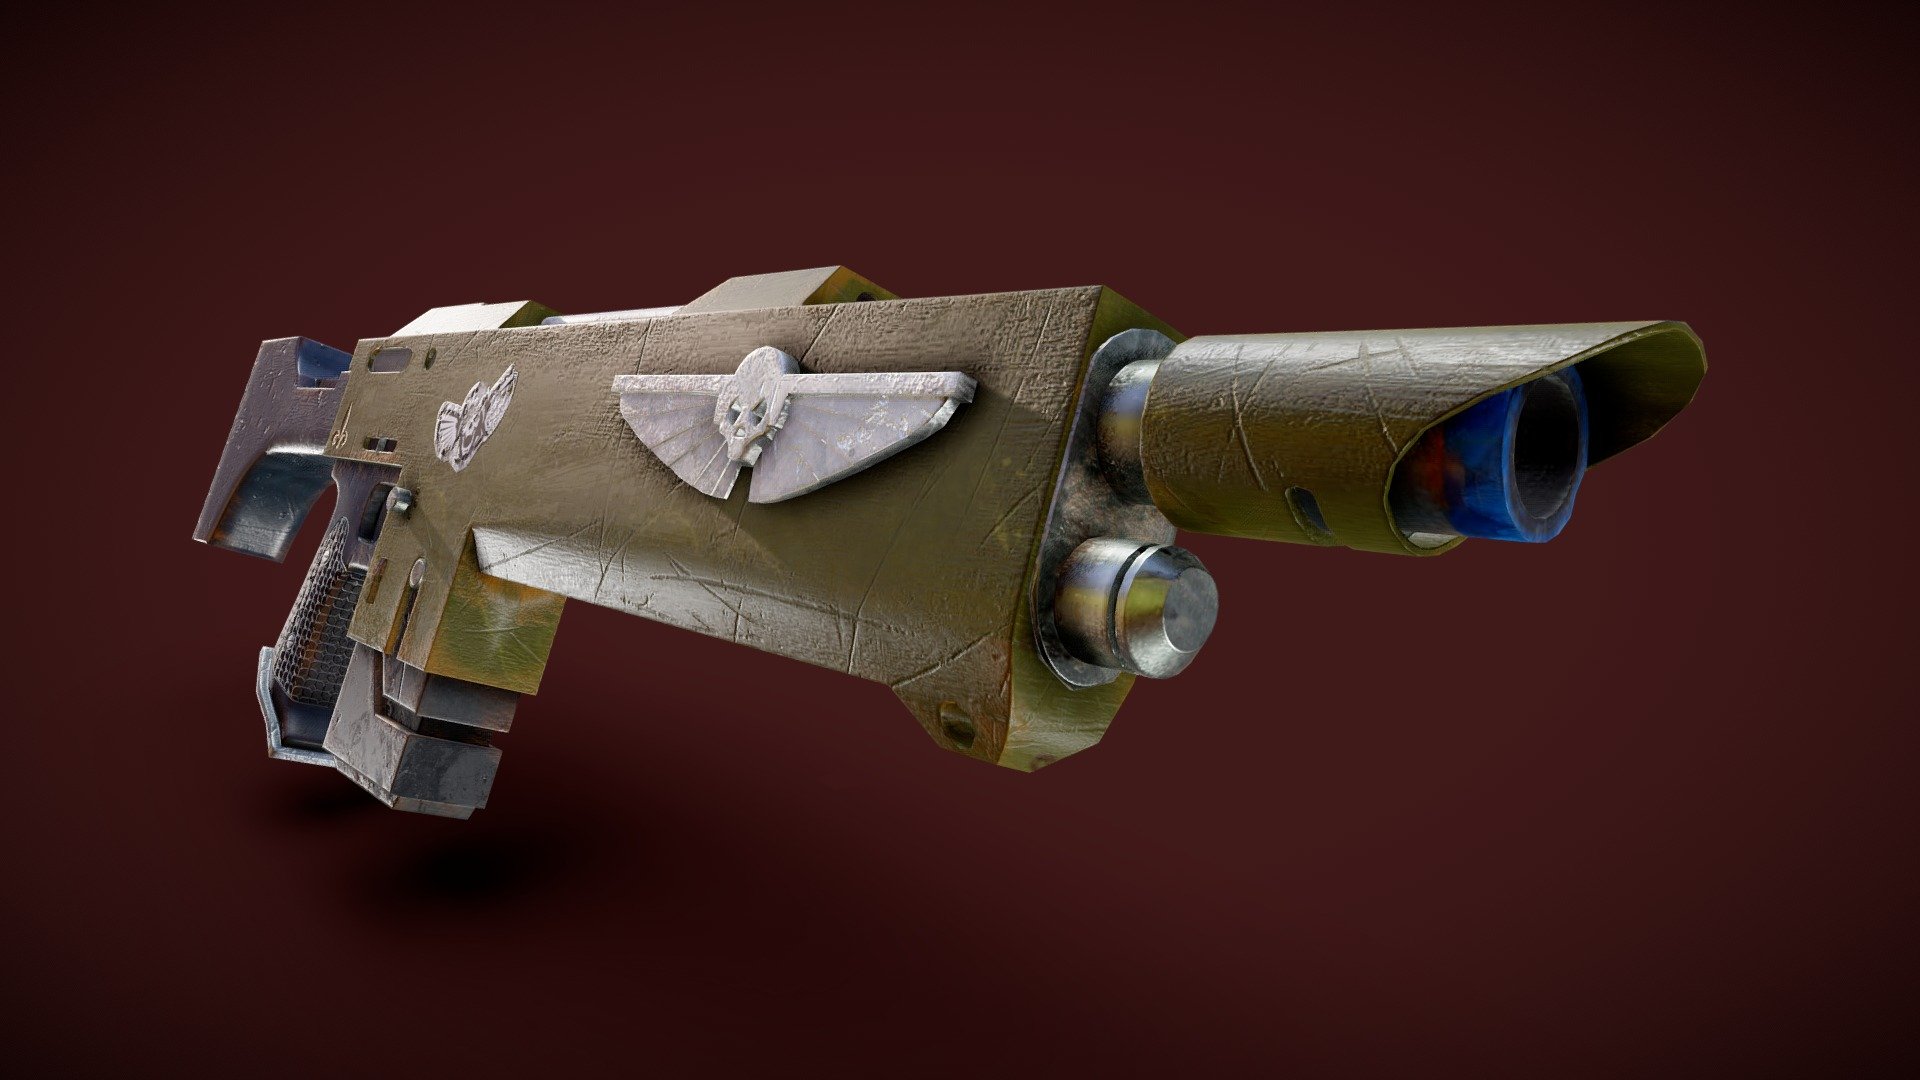 Lasgun from the Warhammer 40K universe

Lasguns come in many different variations. I chose one of them and modeled it in maya and textured it in substance painter 3d model